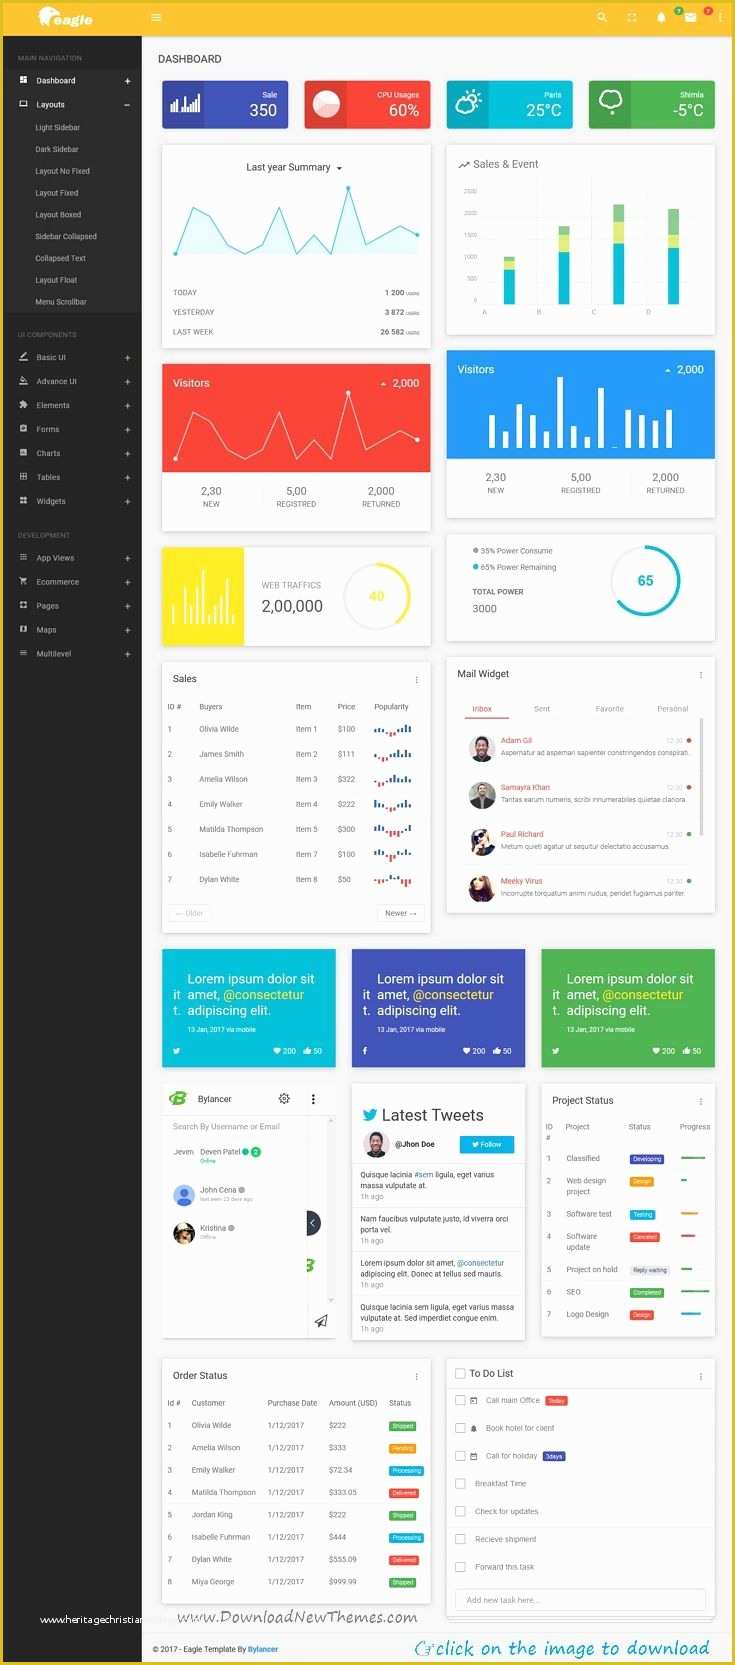 Crm Website Templates Free Download Of Best 25 Dashboard Template Ideas On Pinterest